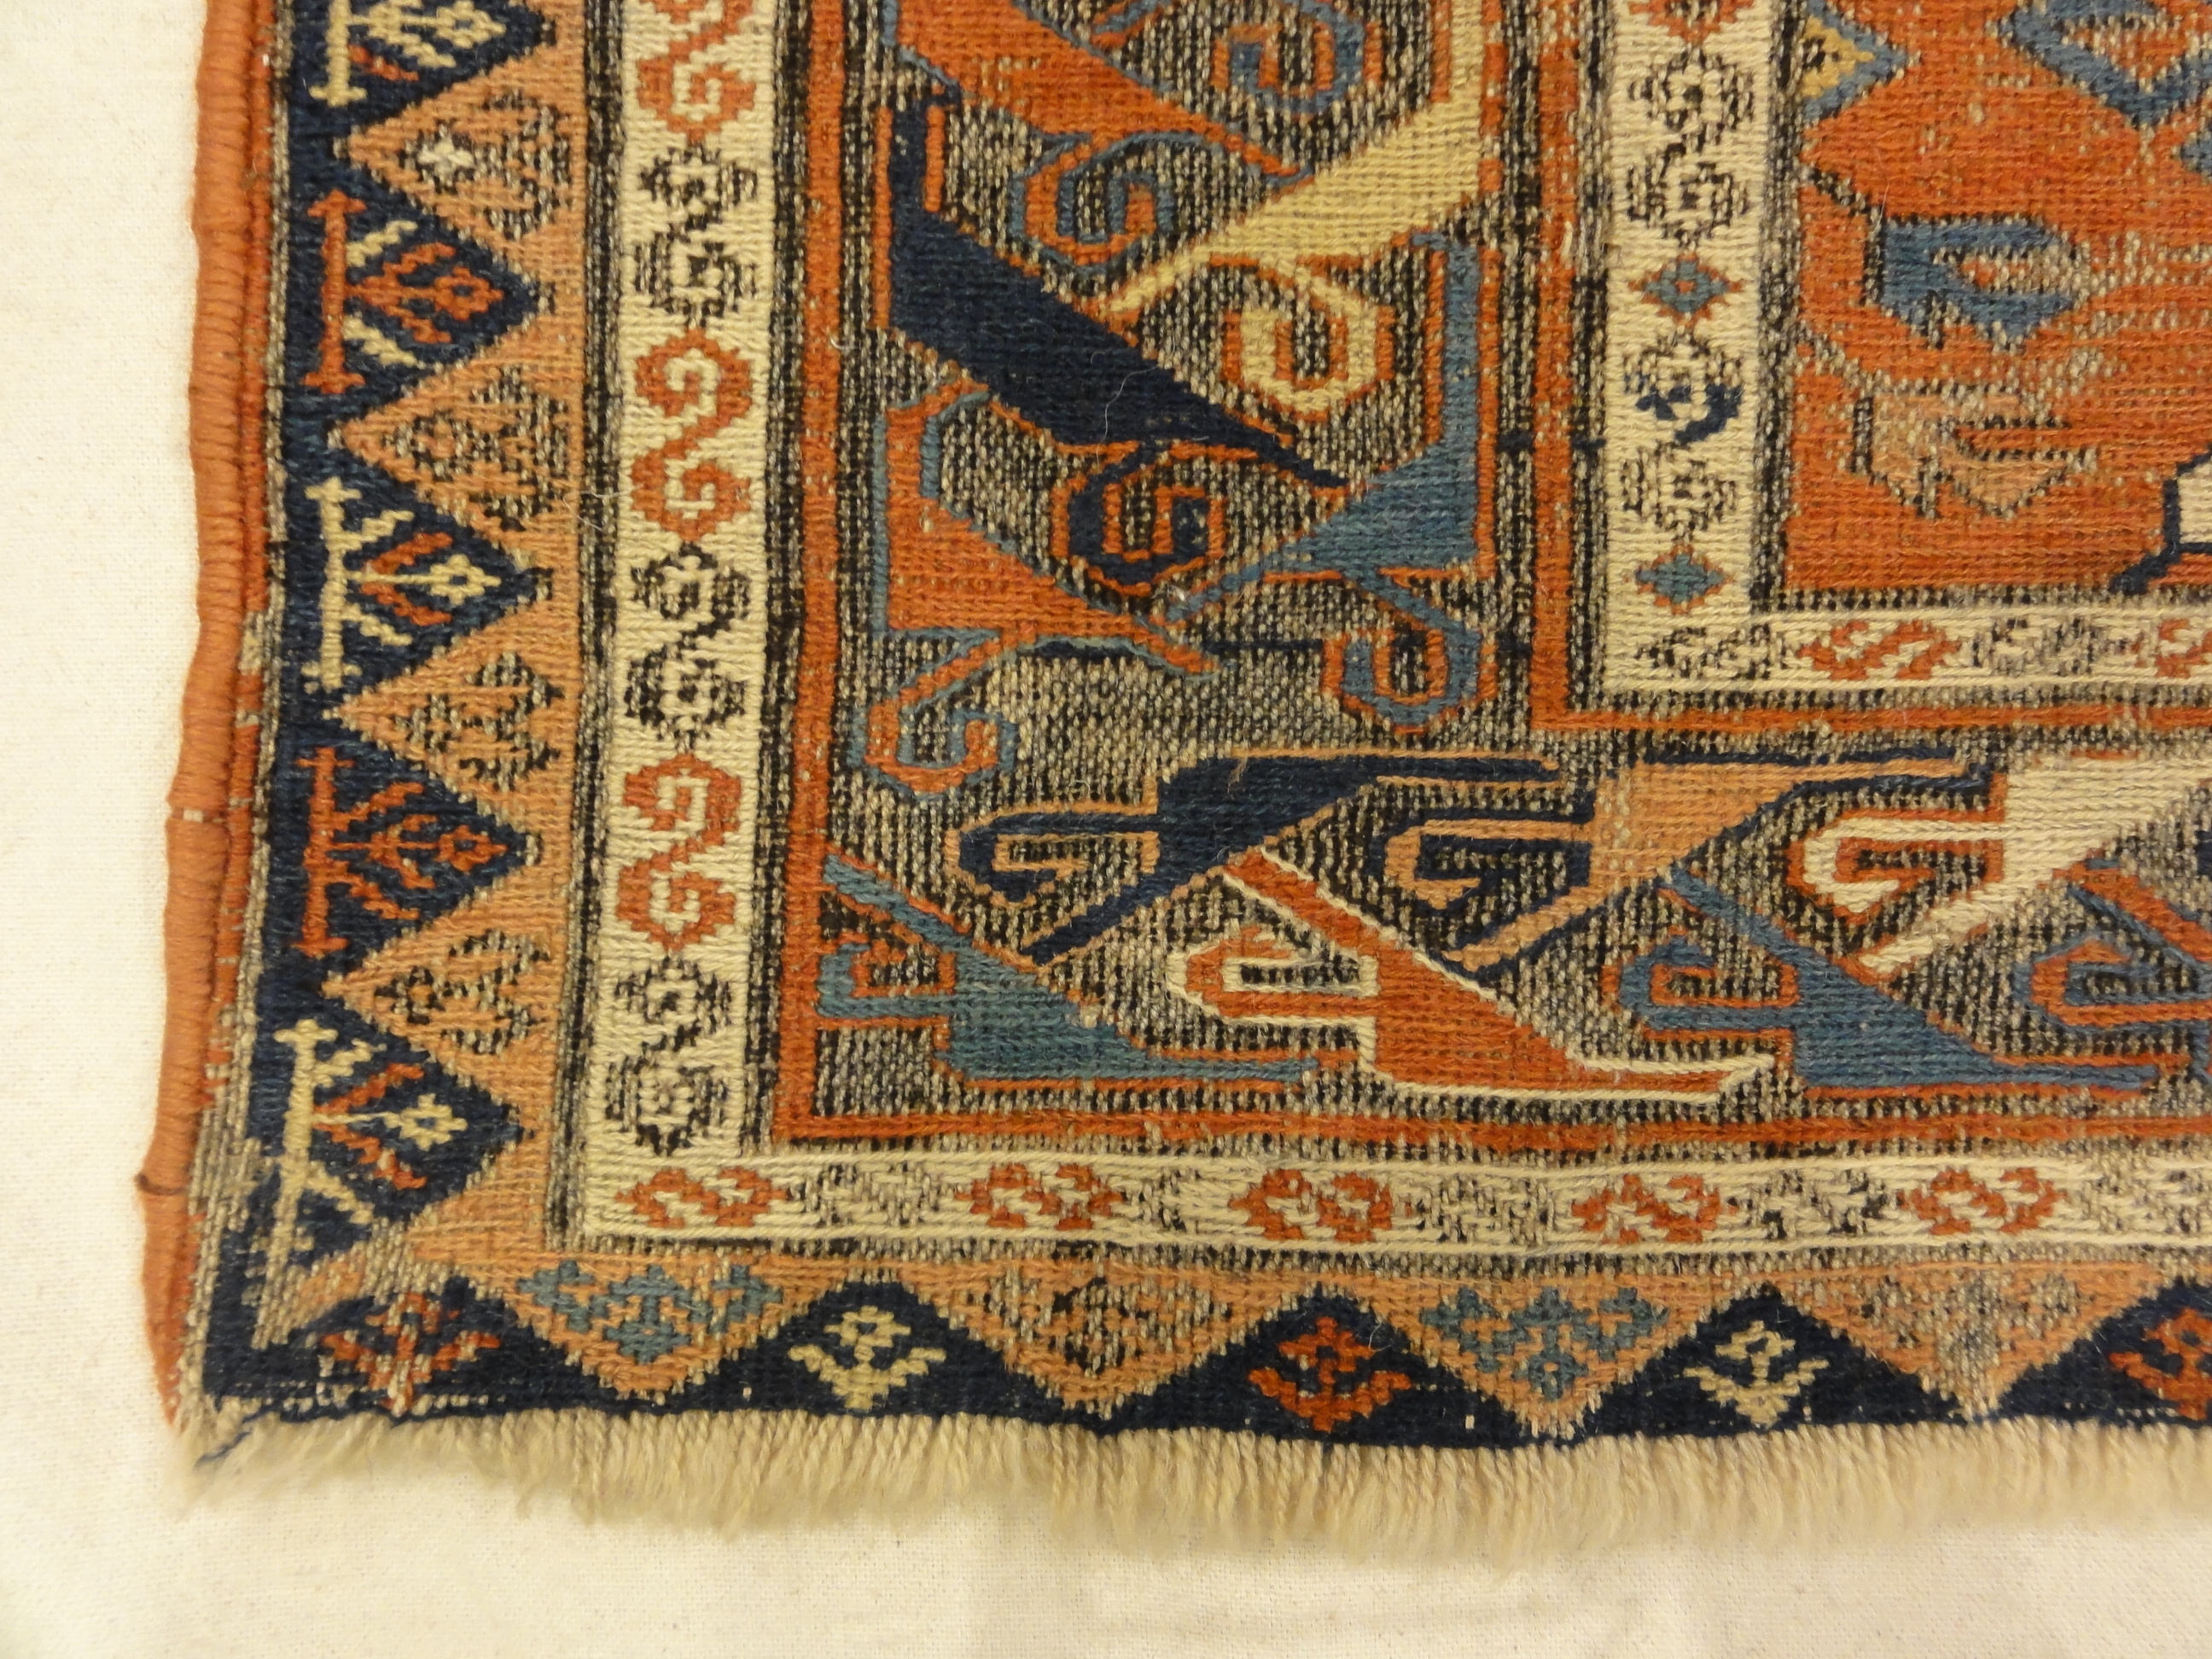 Antique Soumak Kuba Rug. A piece of genuine authentic woven carpet art sold by Santa Barbara Design Center Rugs and More.